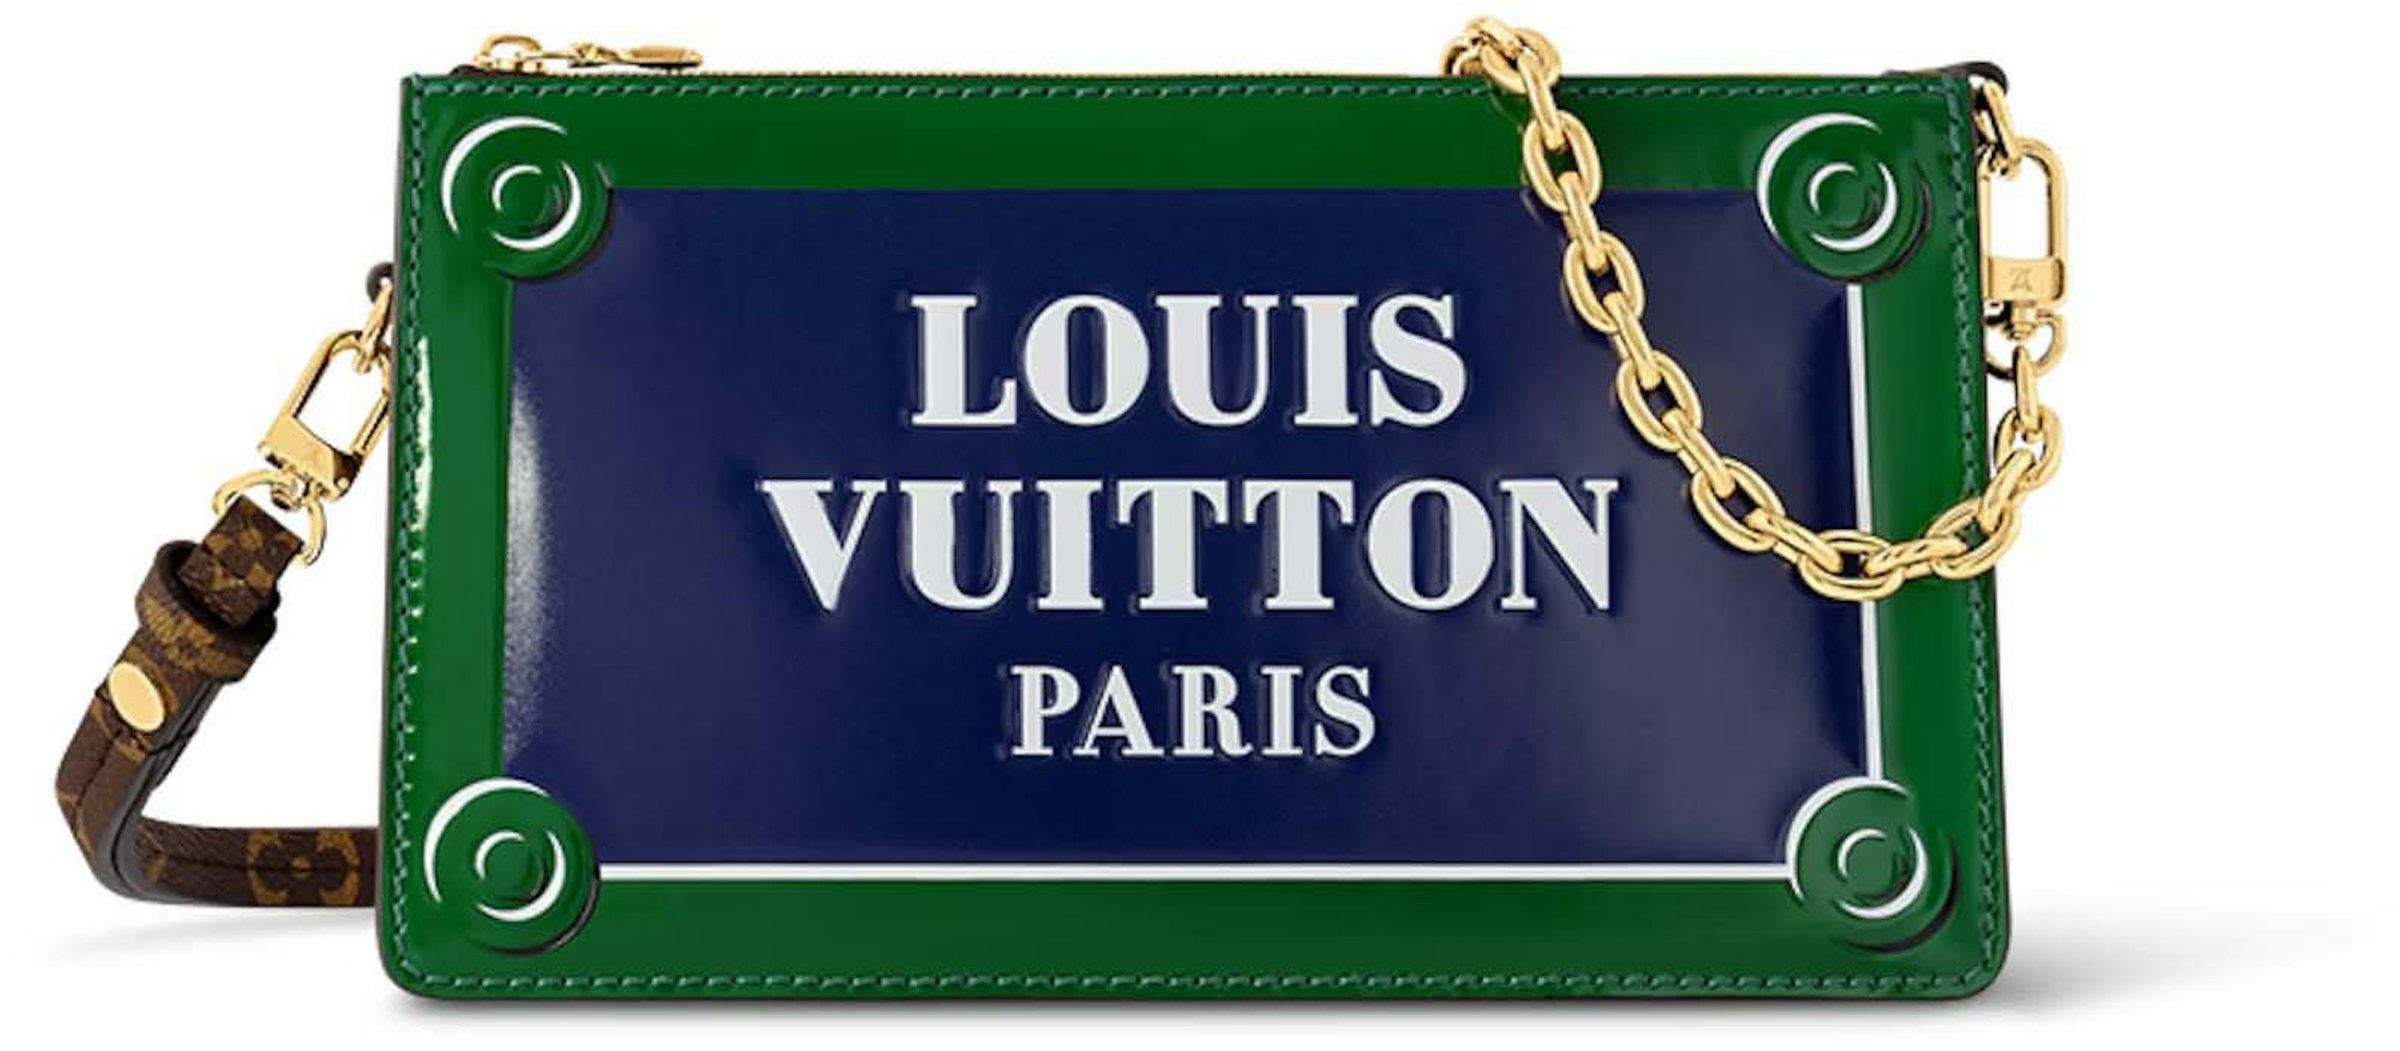 Louis Vuitton Lexington Pouch Blue/Green in Calfskin Leather with